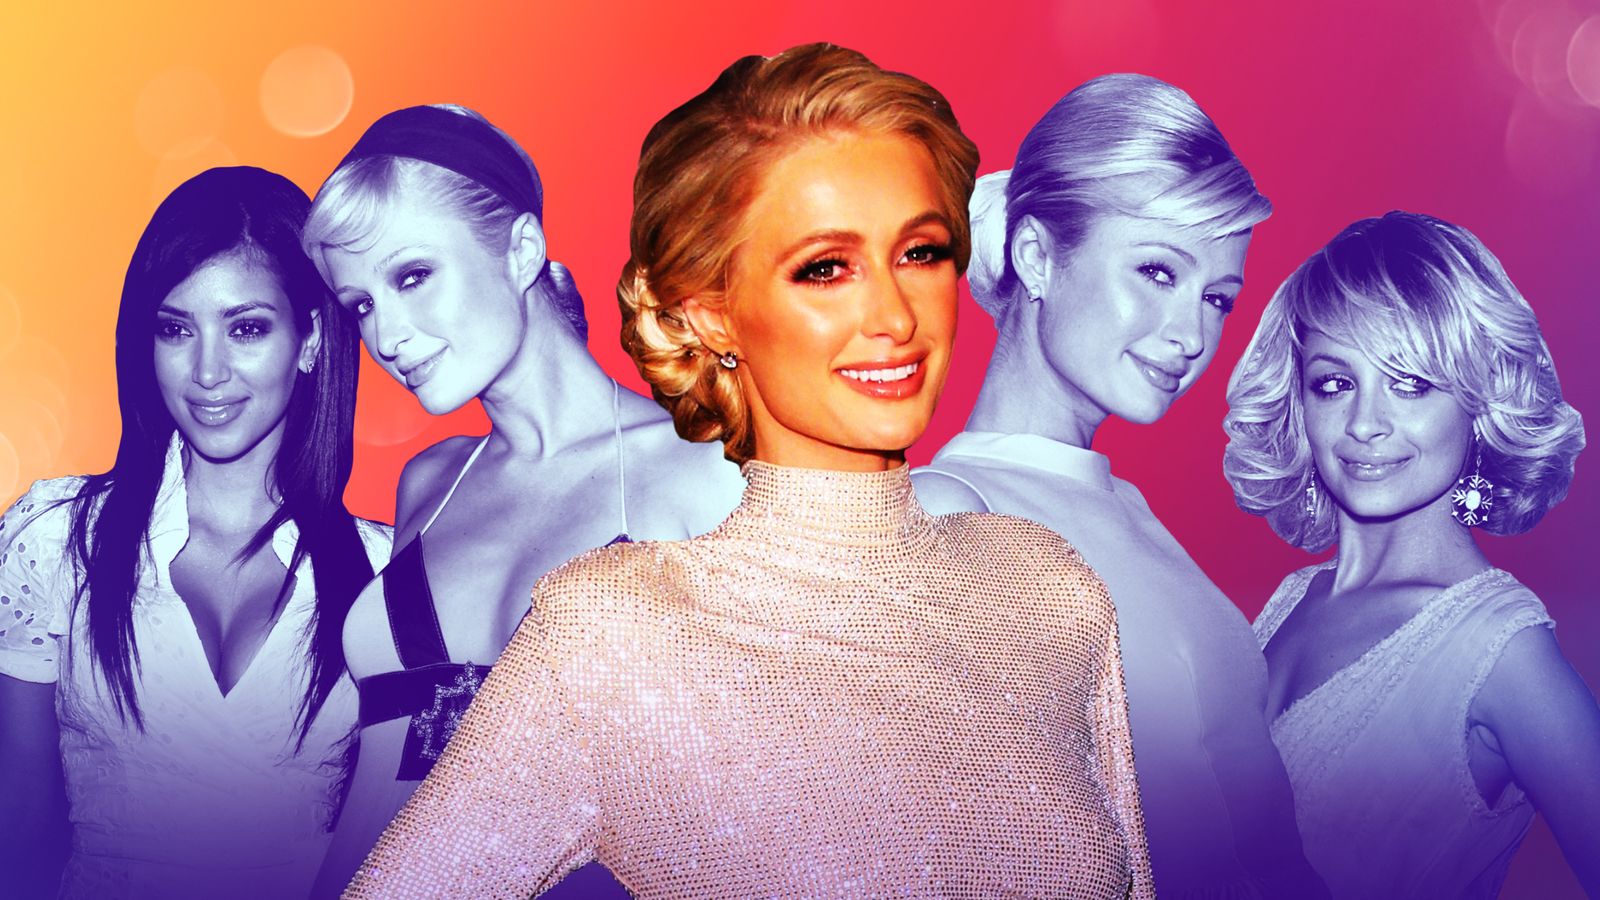 18 Years Old Amateur - Paris Hilton reckons with her legacy â€” and so should we | CNN